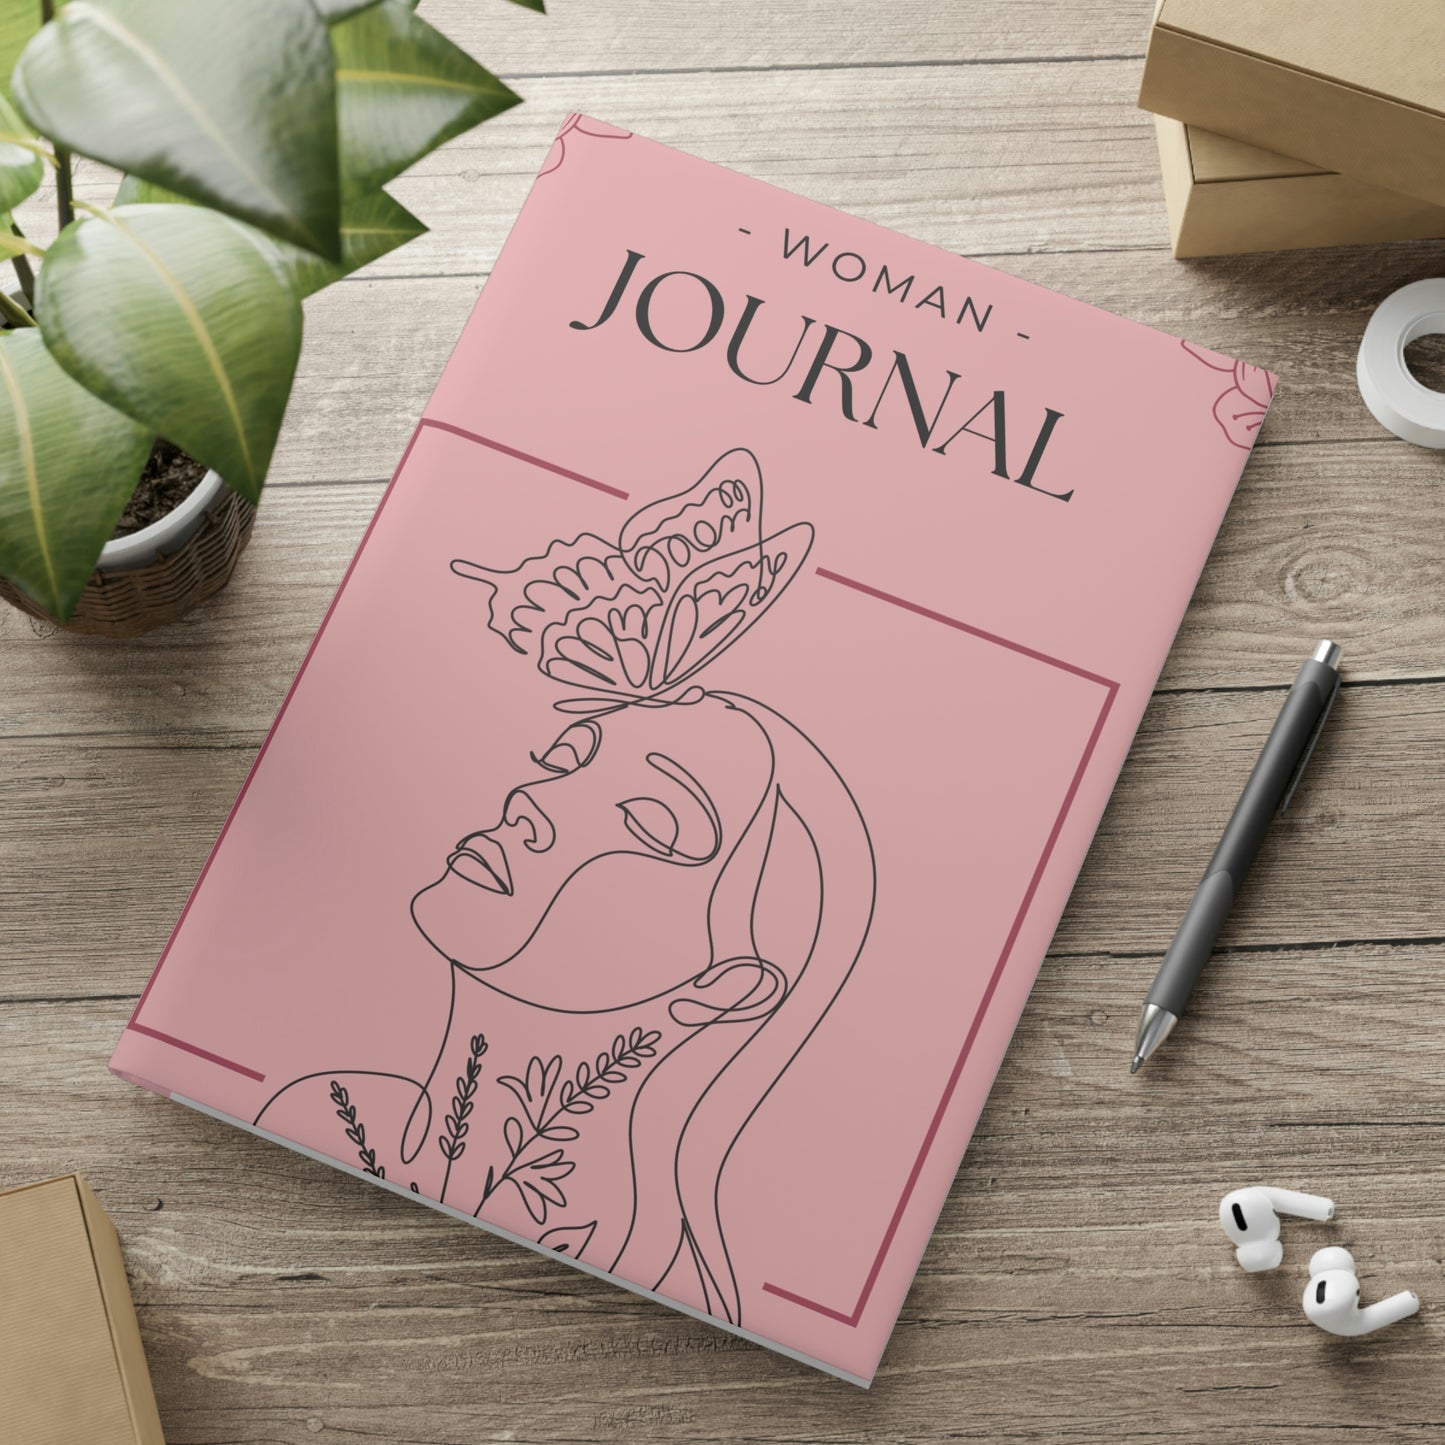 Woman Journal - Hardcover Notebook with Puffy Covers